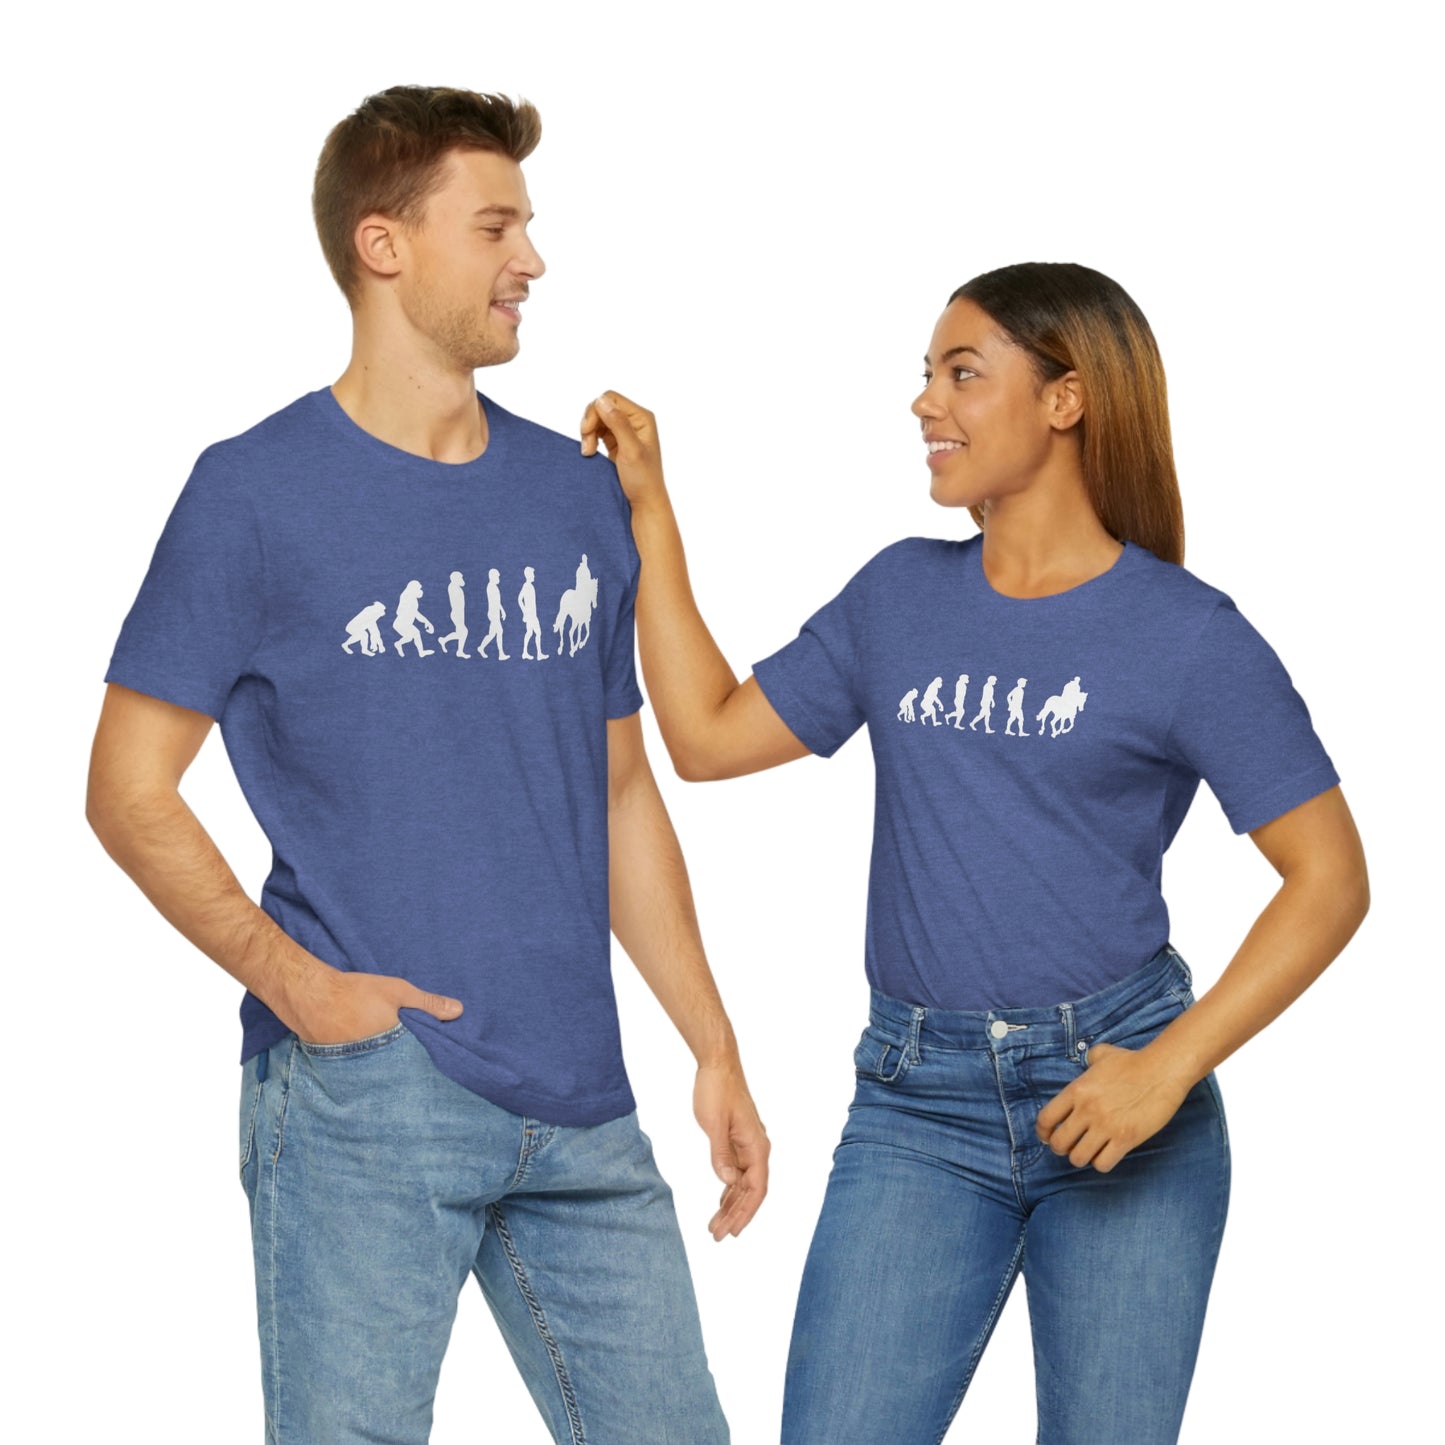 A Comfortable T-Shirt for Men And Women, Unisex Jersey Short Sleeve Tee Dad Mom Adult T-Shirt